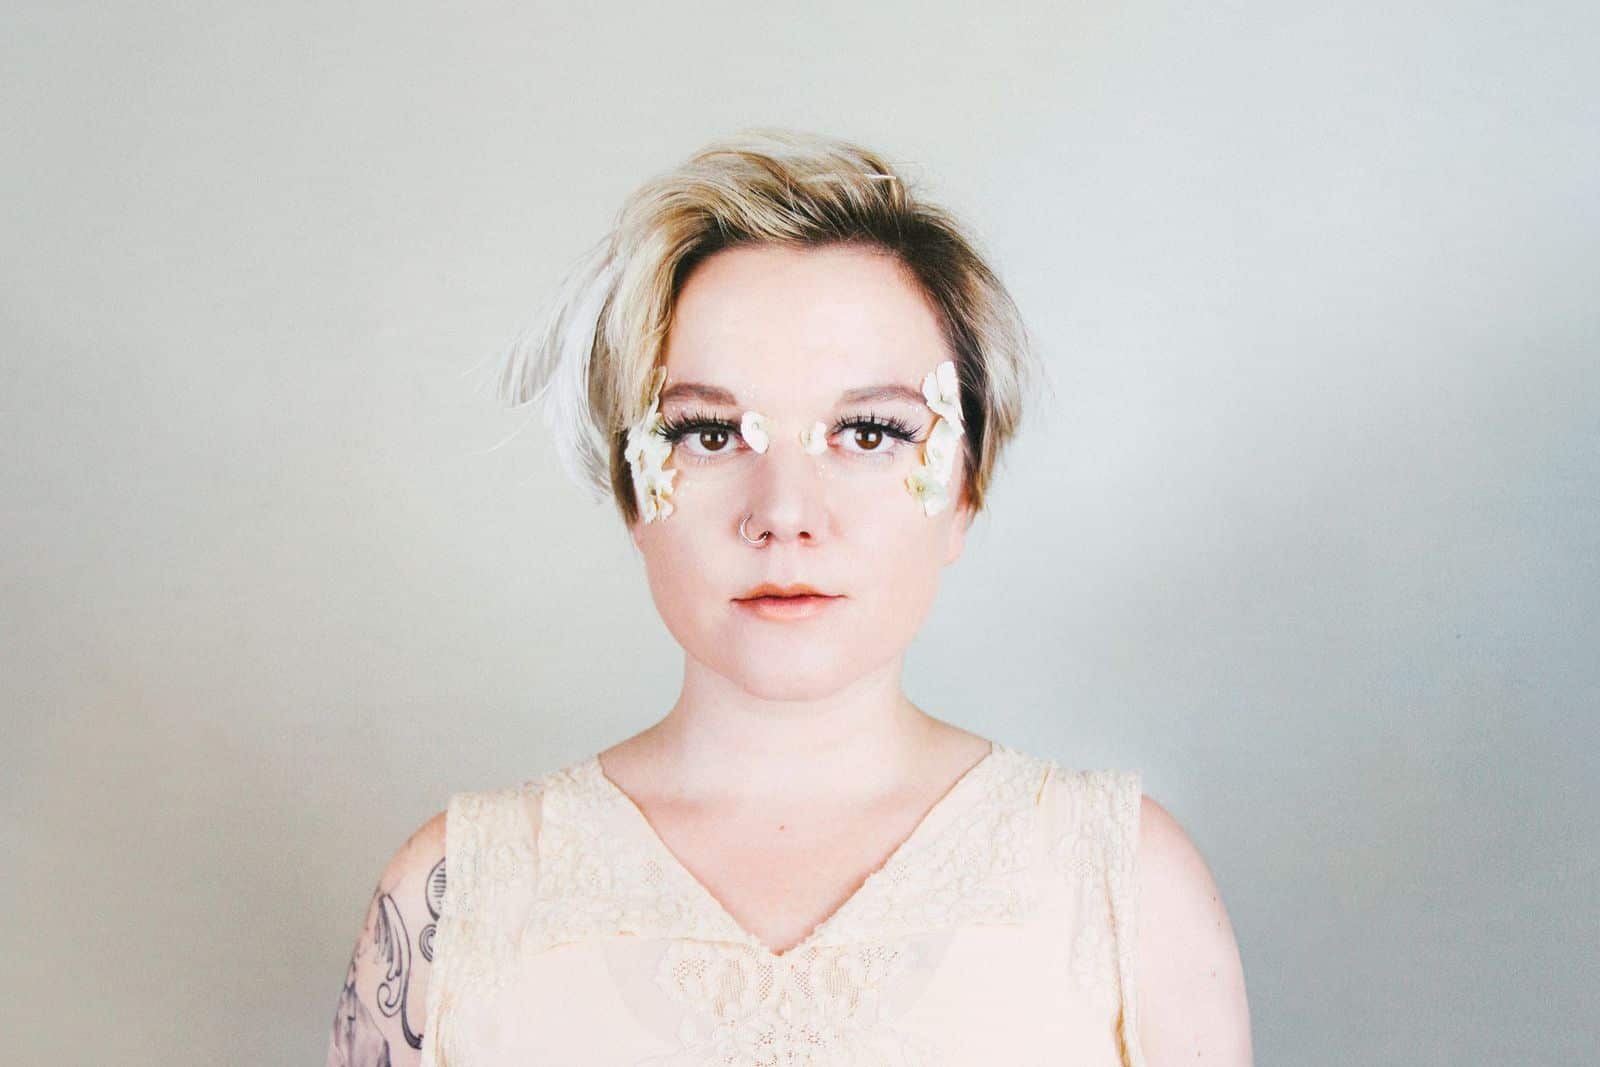 Lydia Loveless Calls Out a Clichés with Papier-Mâché in “Love is Not Enough”